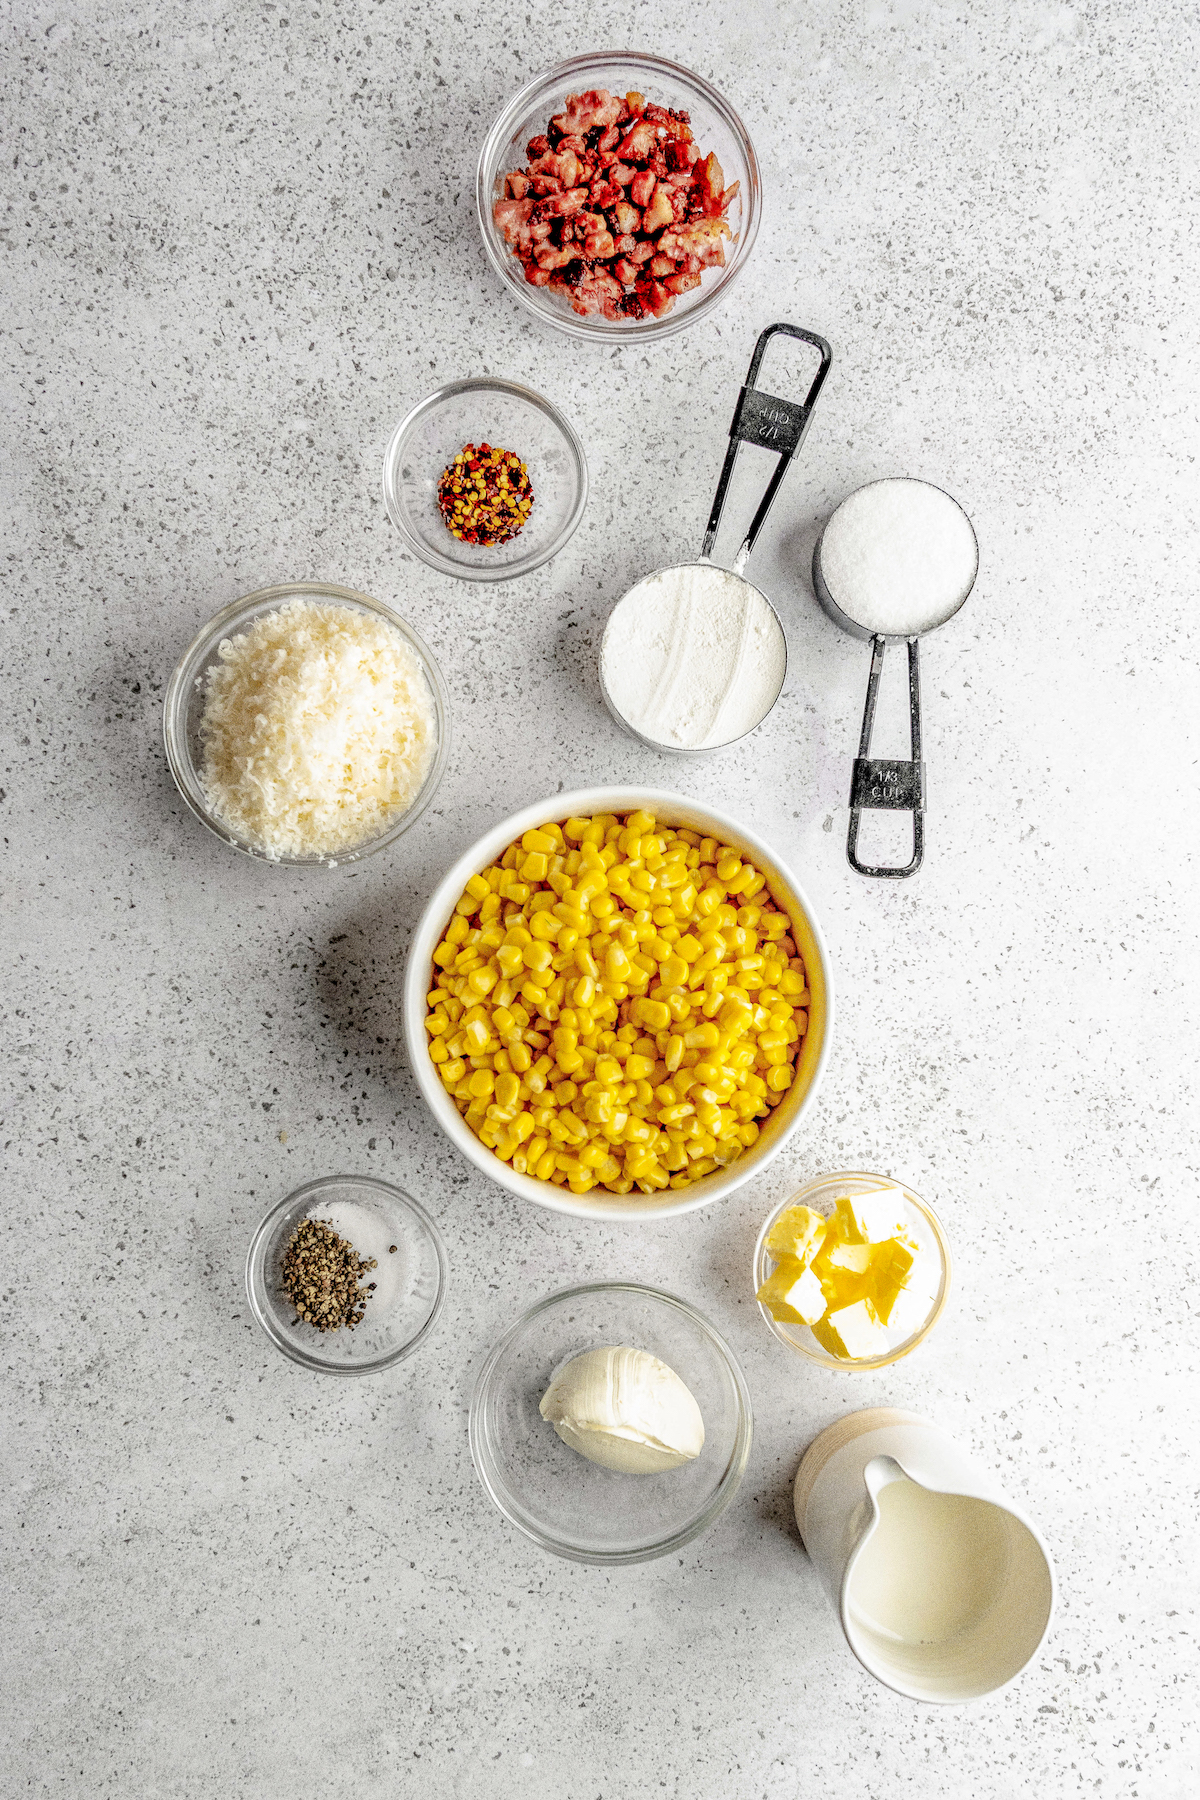 Ingredients for creamed corn recipe arranged in bowls on a countertop.